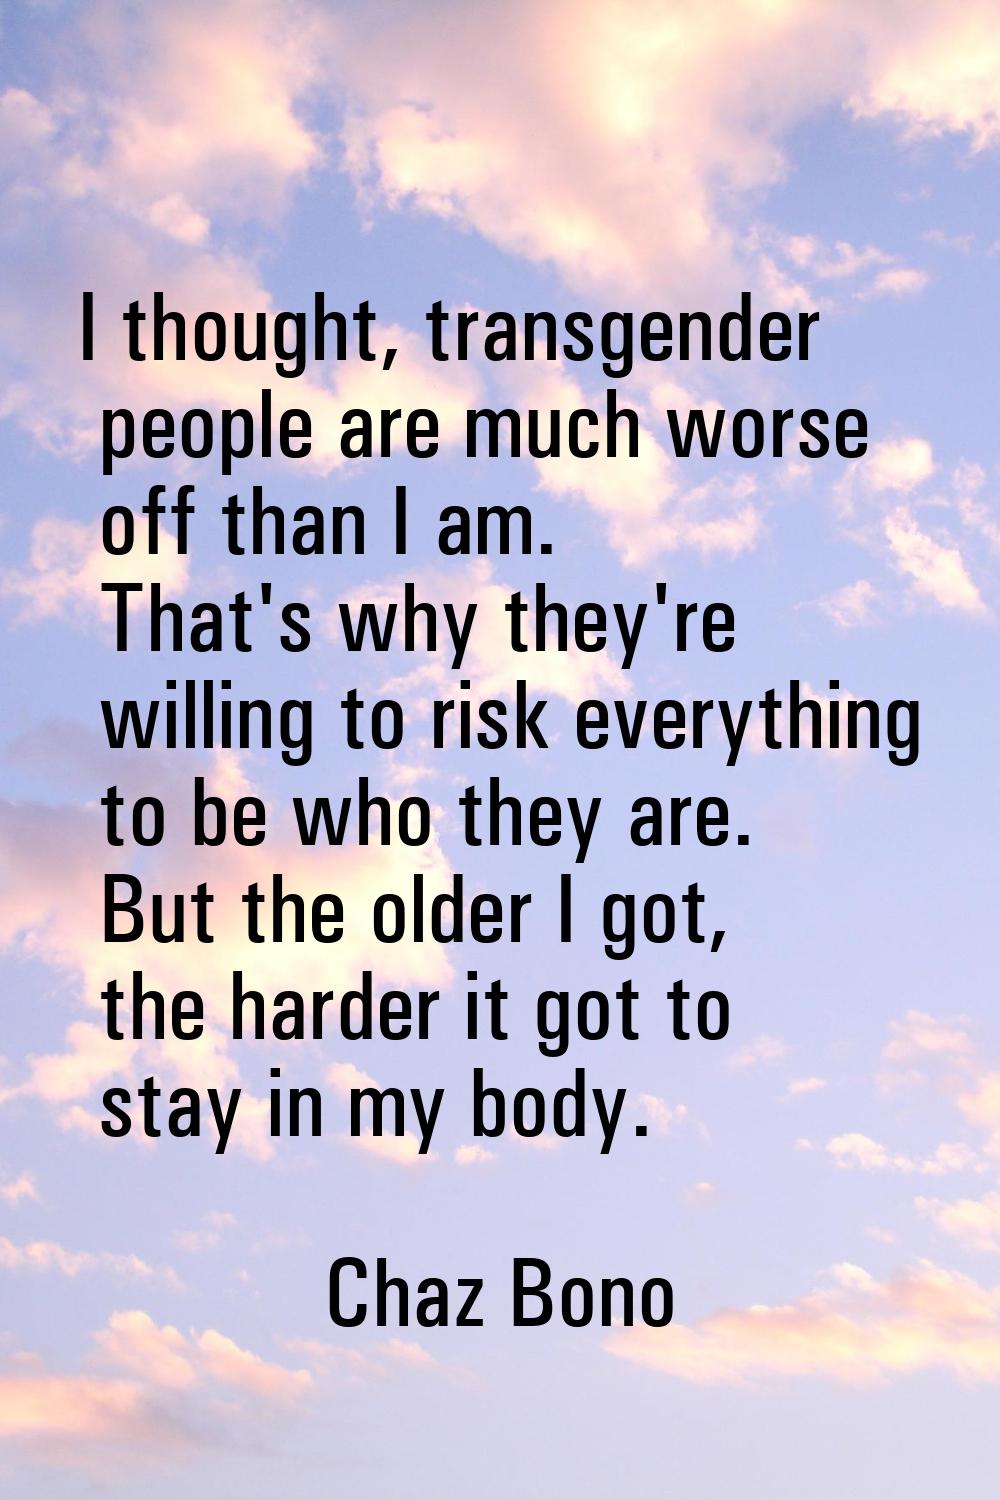 I thought, transgender people are much worse off than I am. That's why they're willing to risk ever